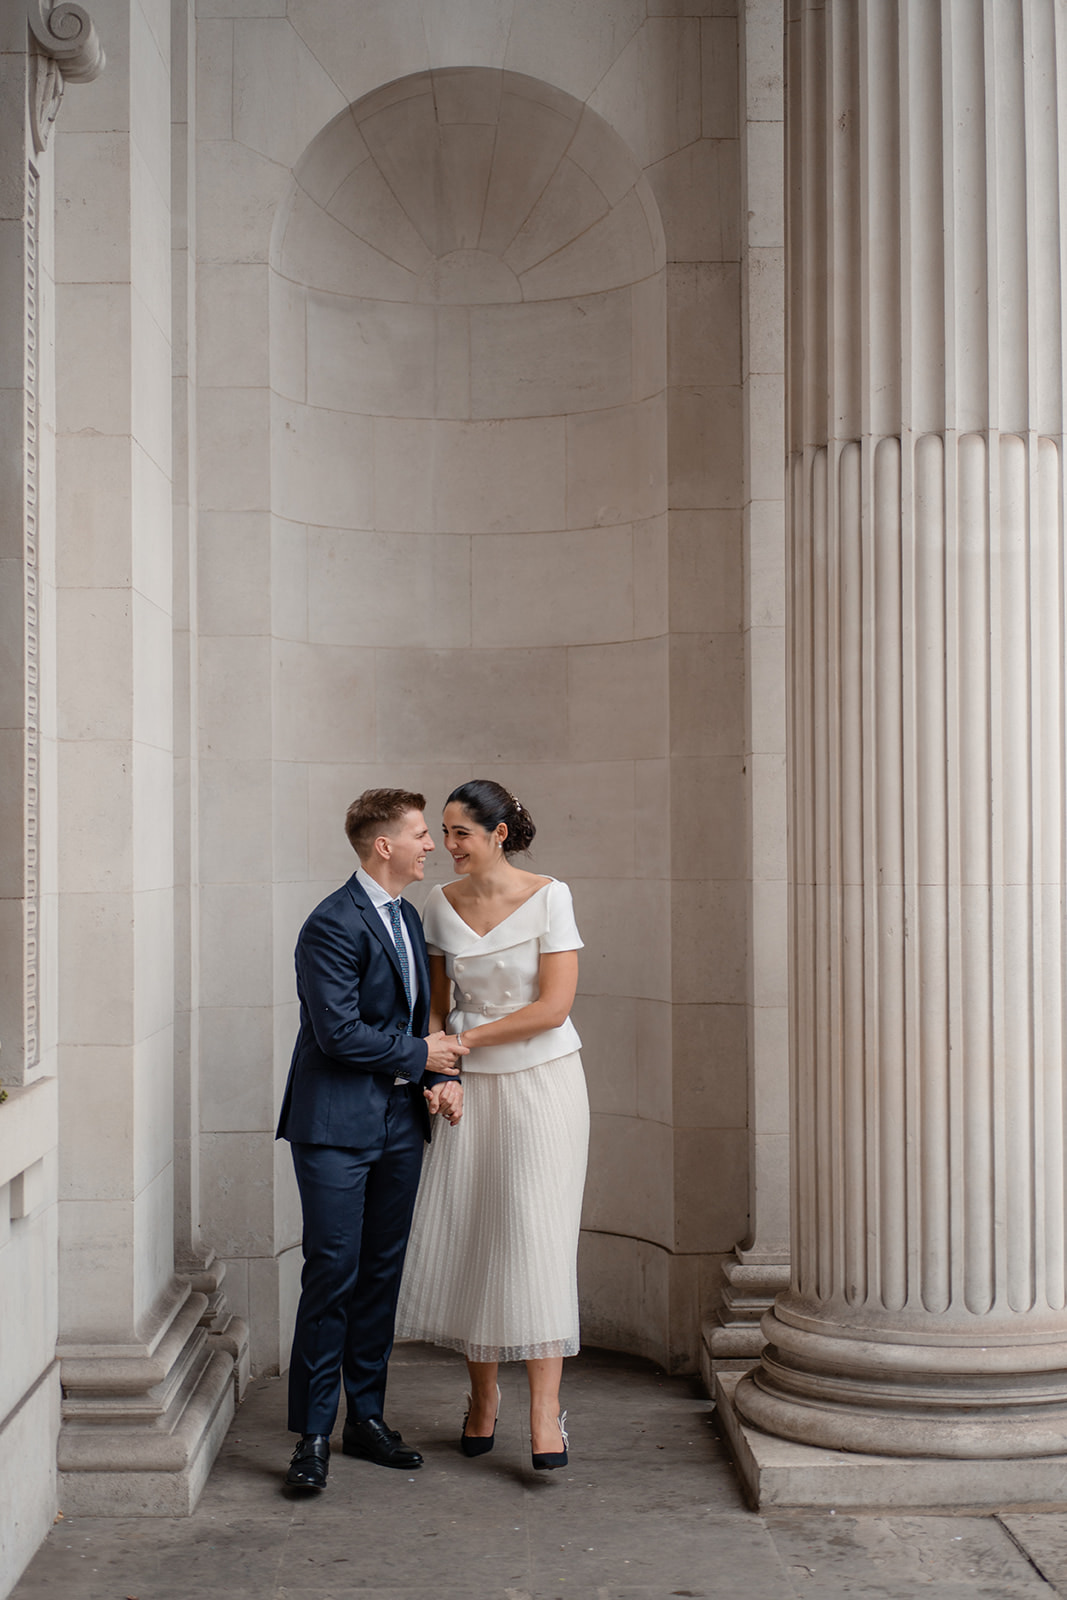 A couple getting married at Marylebone old town hall